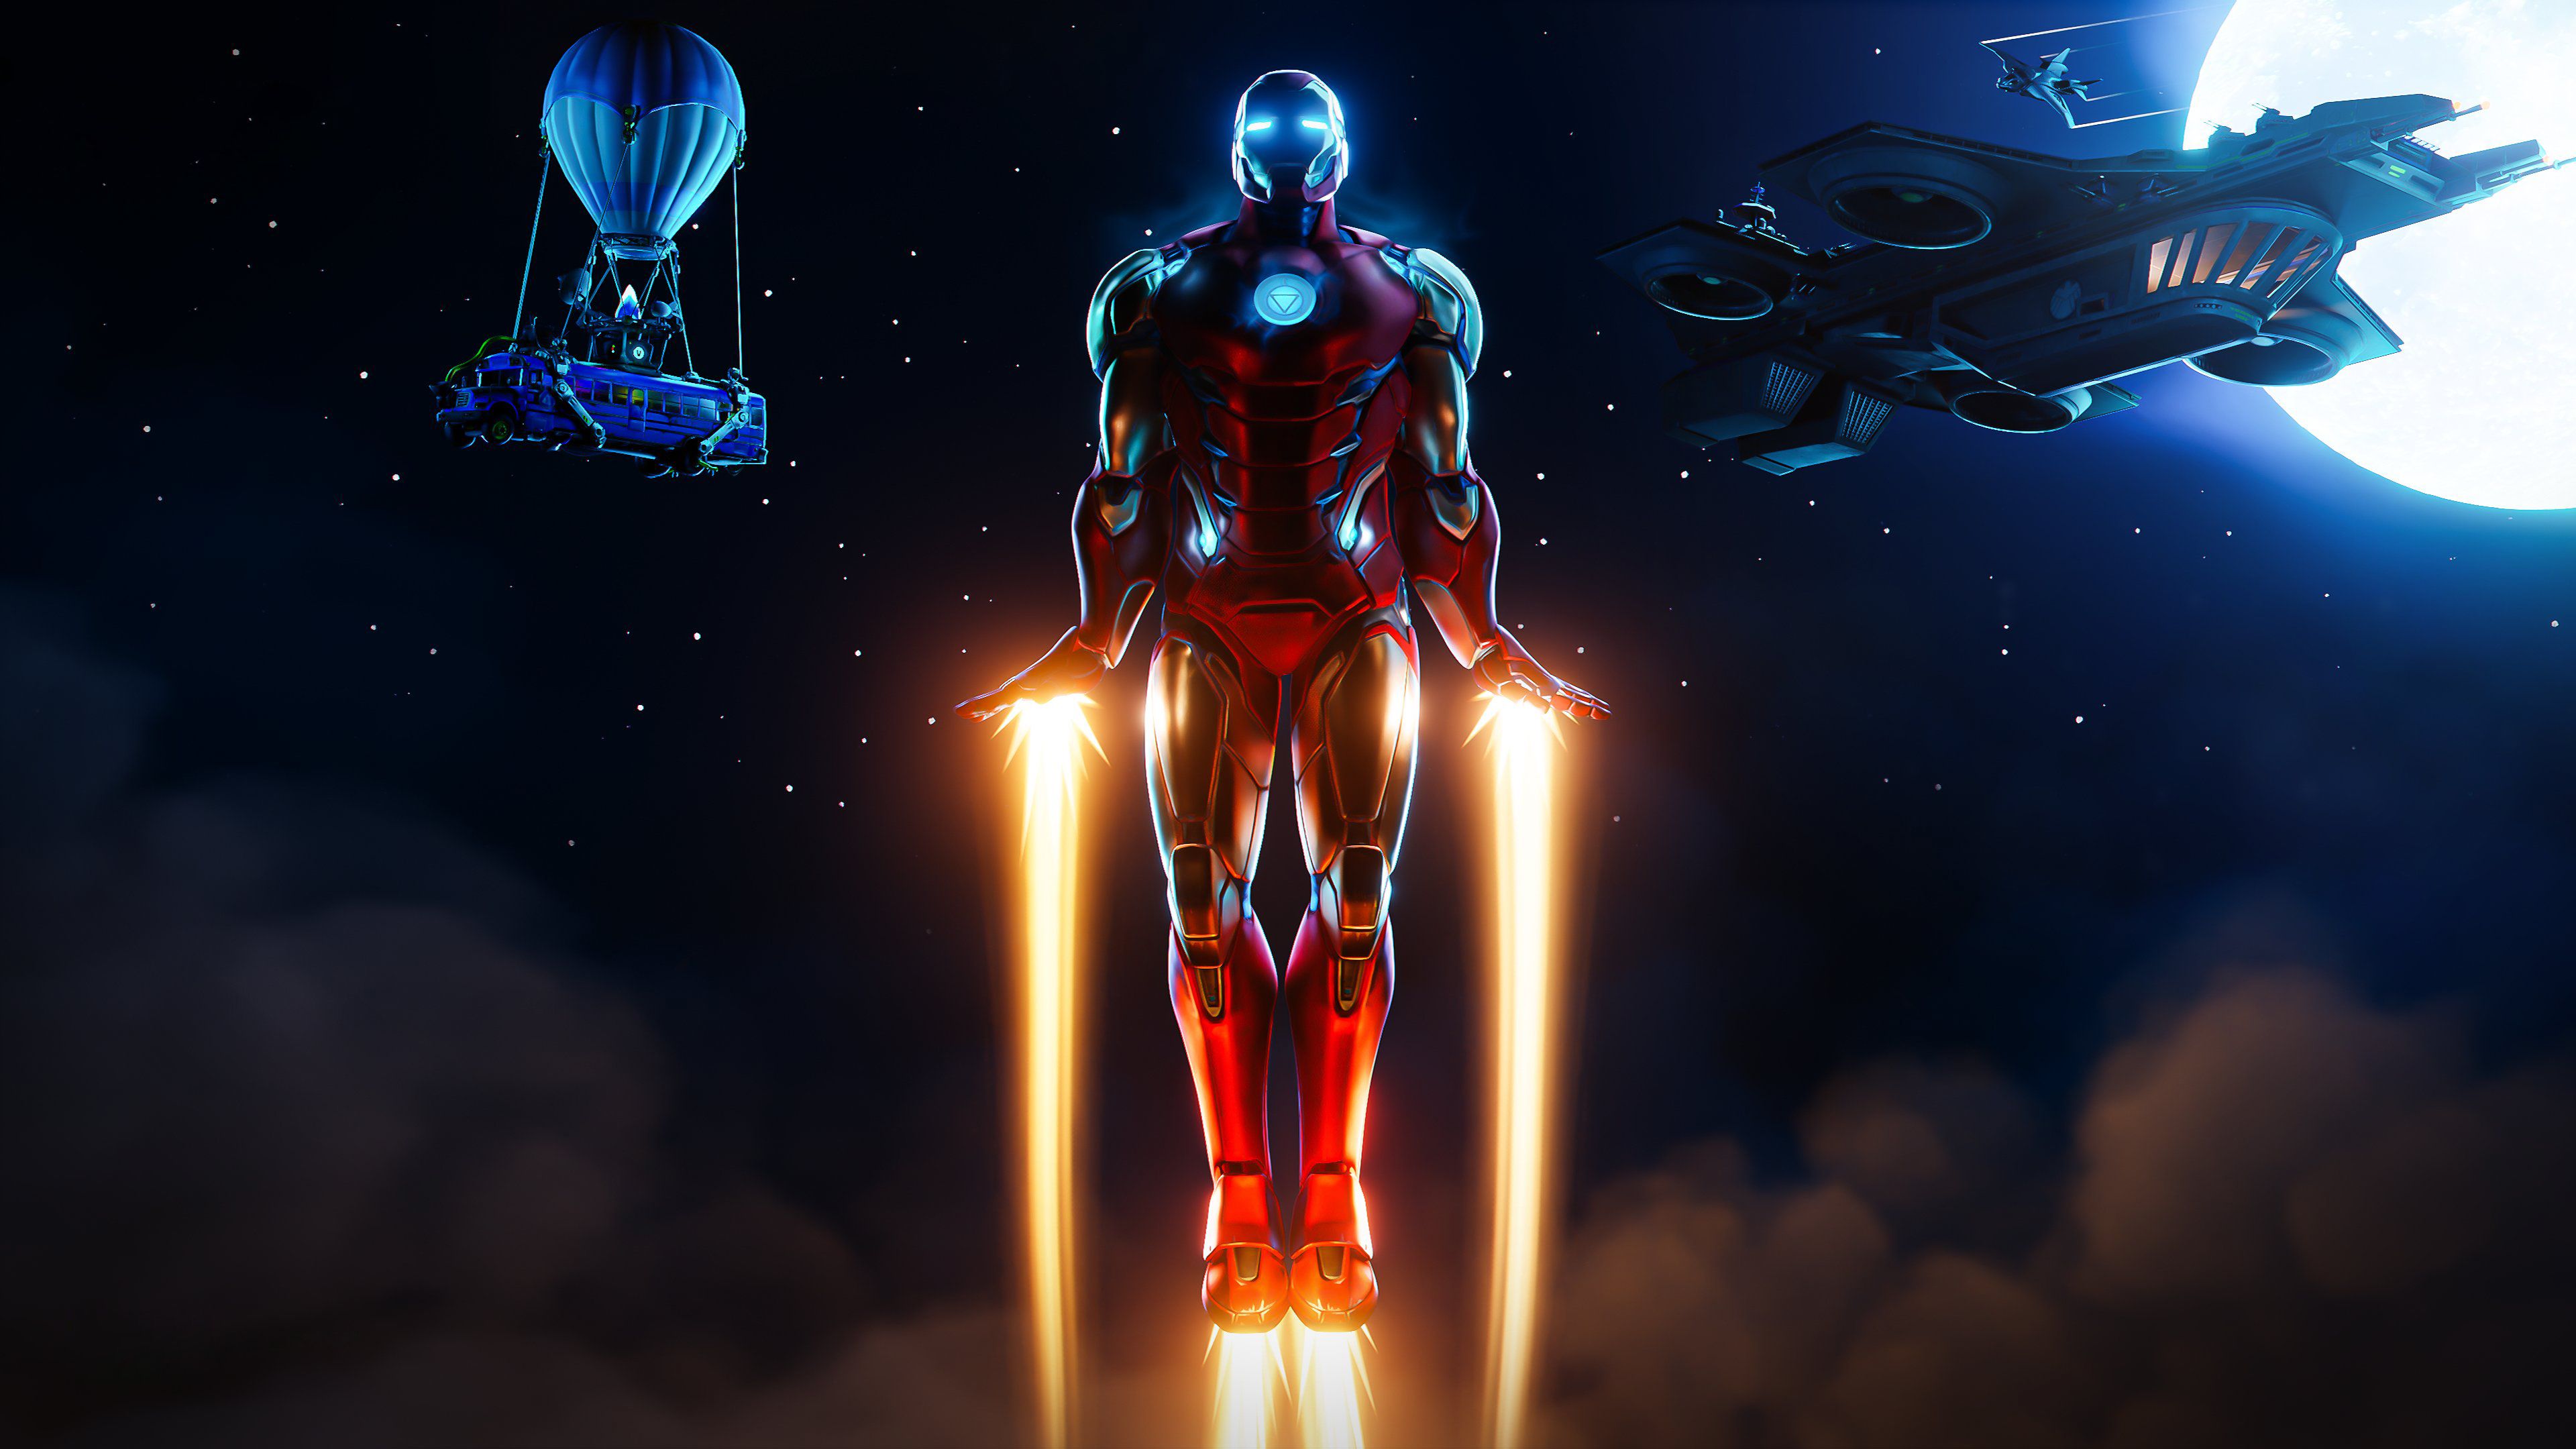 Iron Man Fortnite Wallpaper, HD Games 4K Wallpaper, Image, Photo and Background